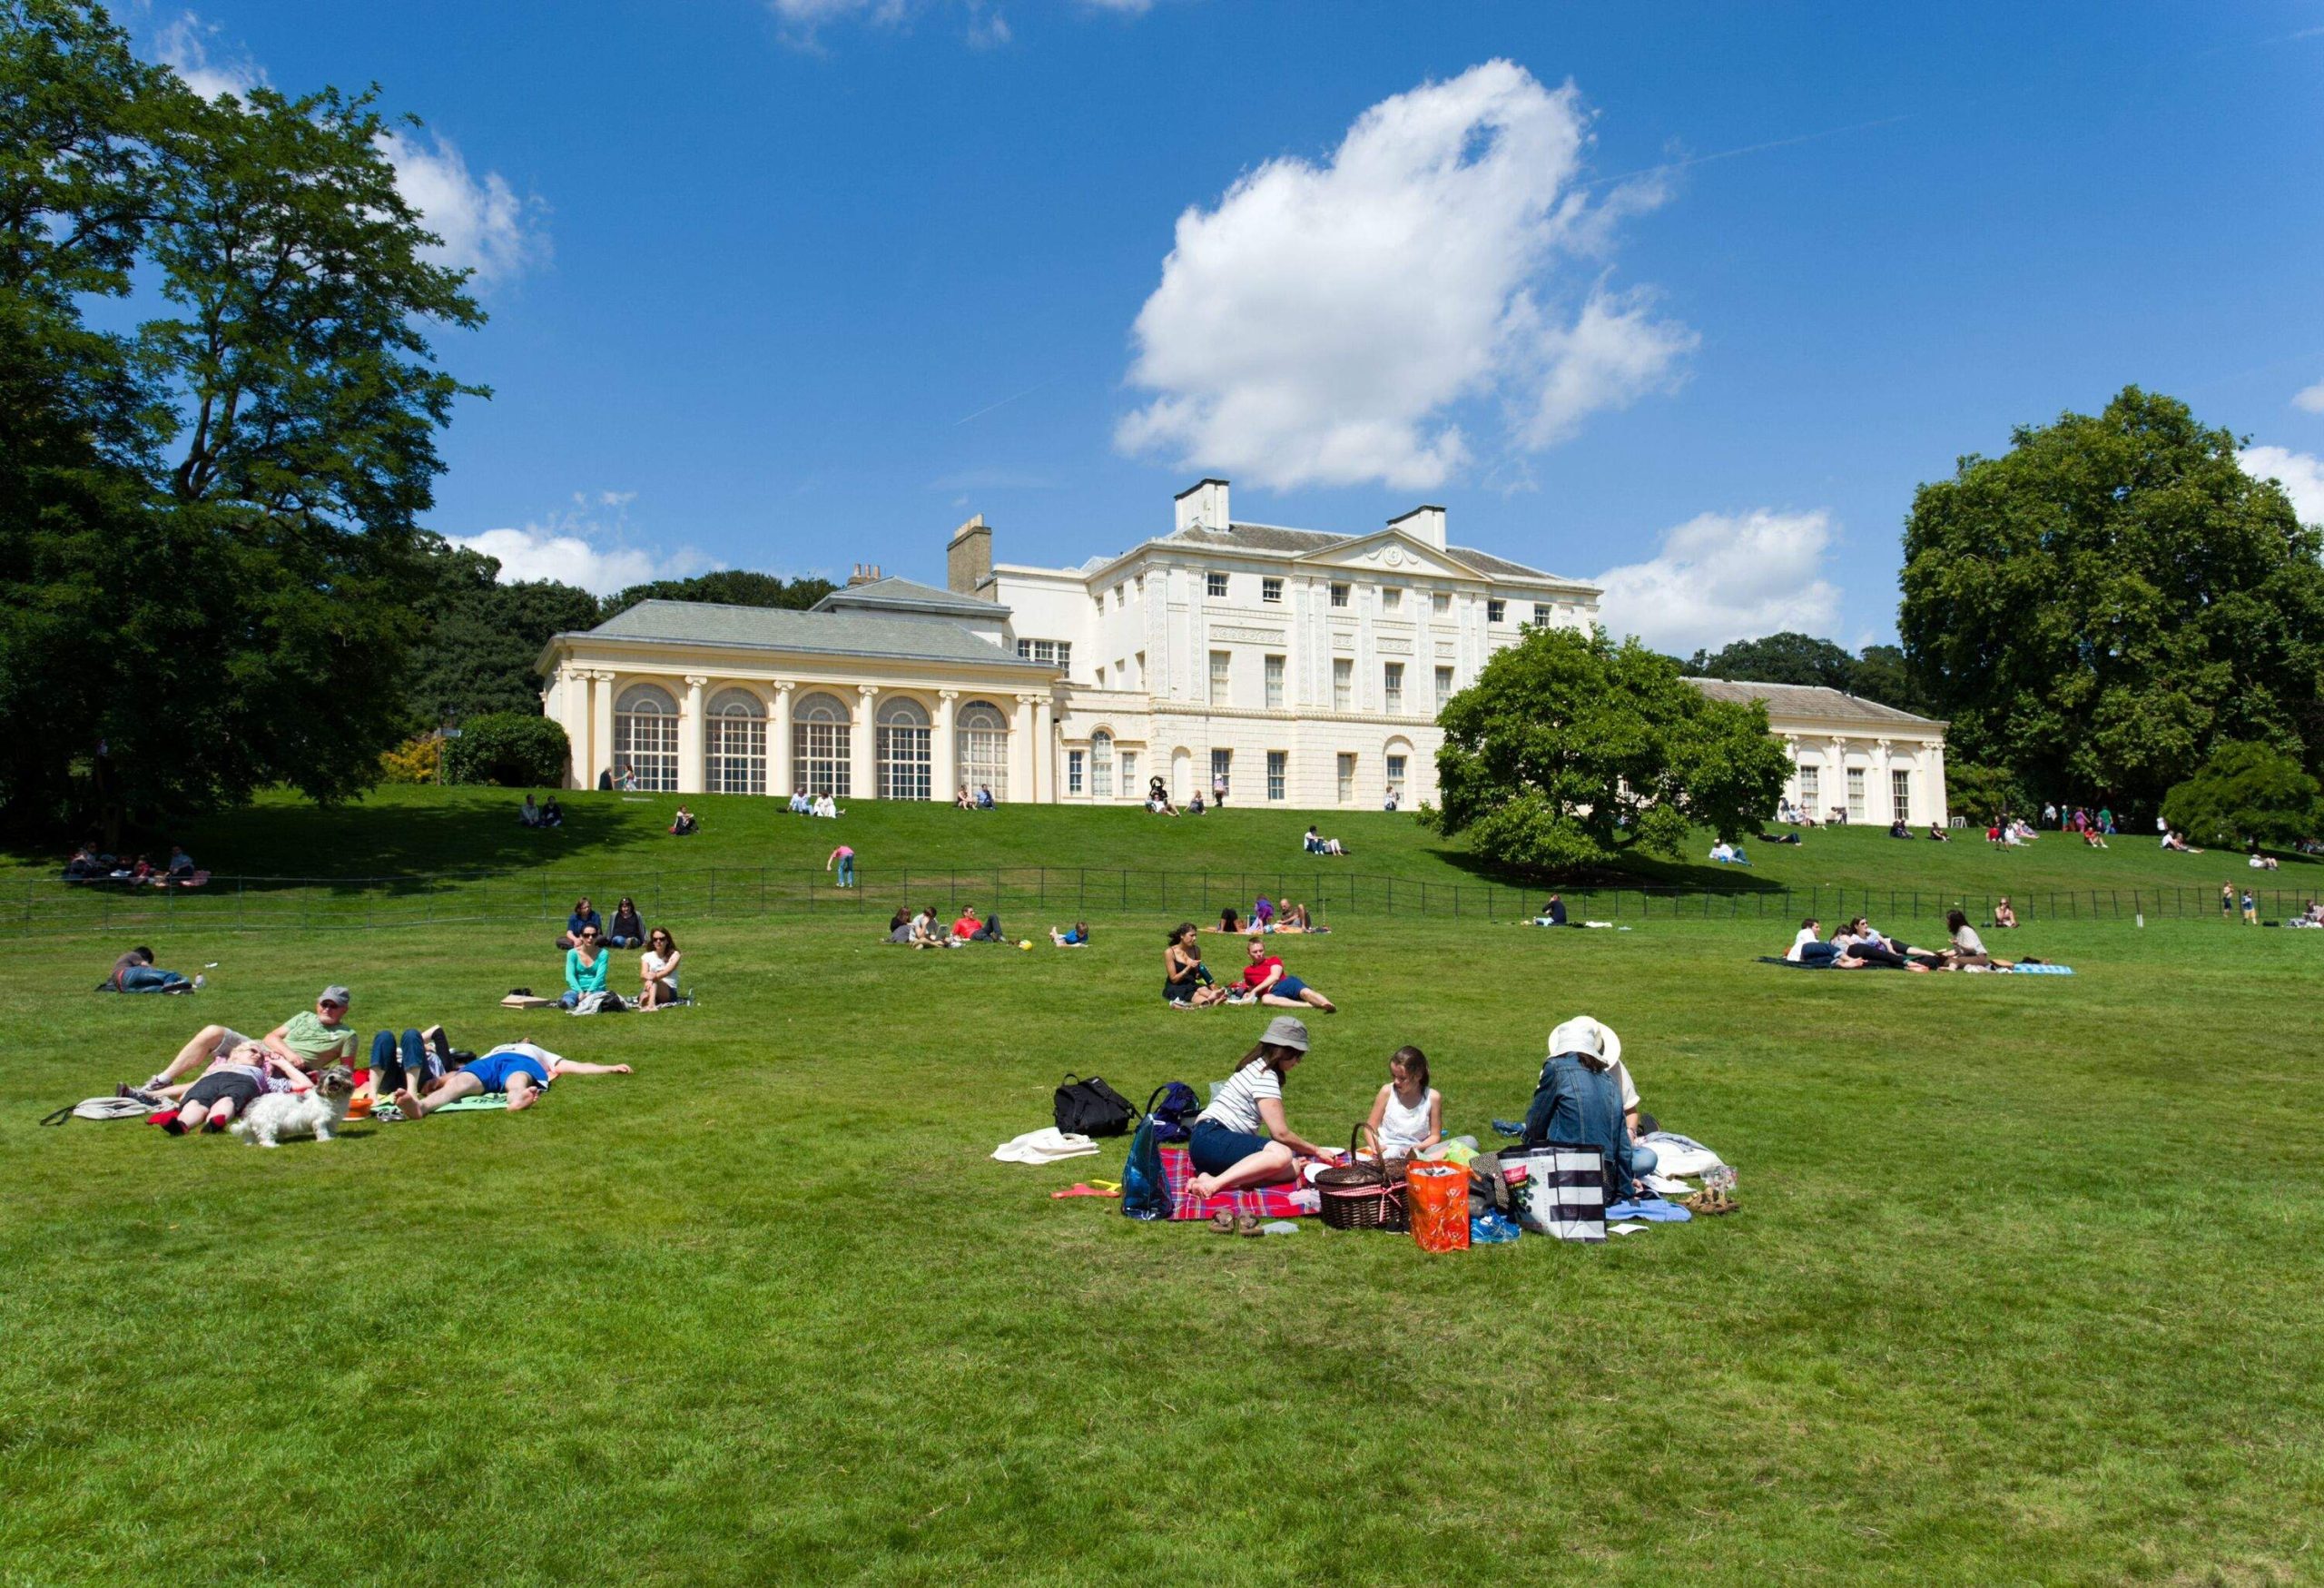 Individuals relish the sun in a verdant park in front of a classic white country house.